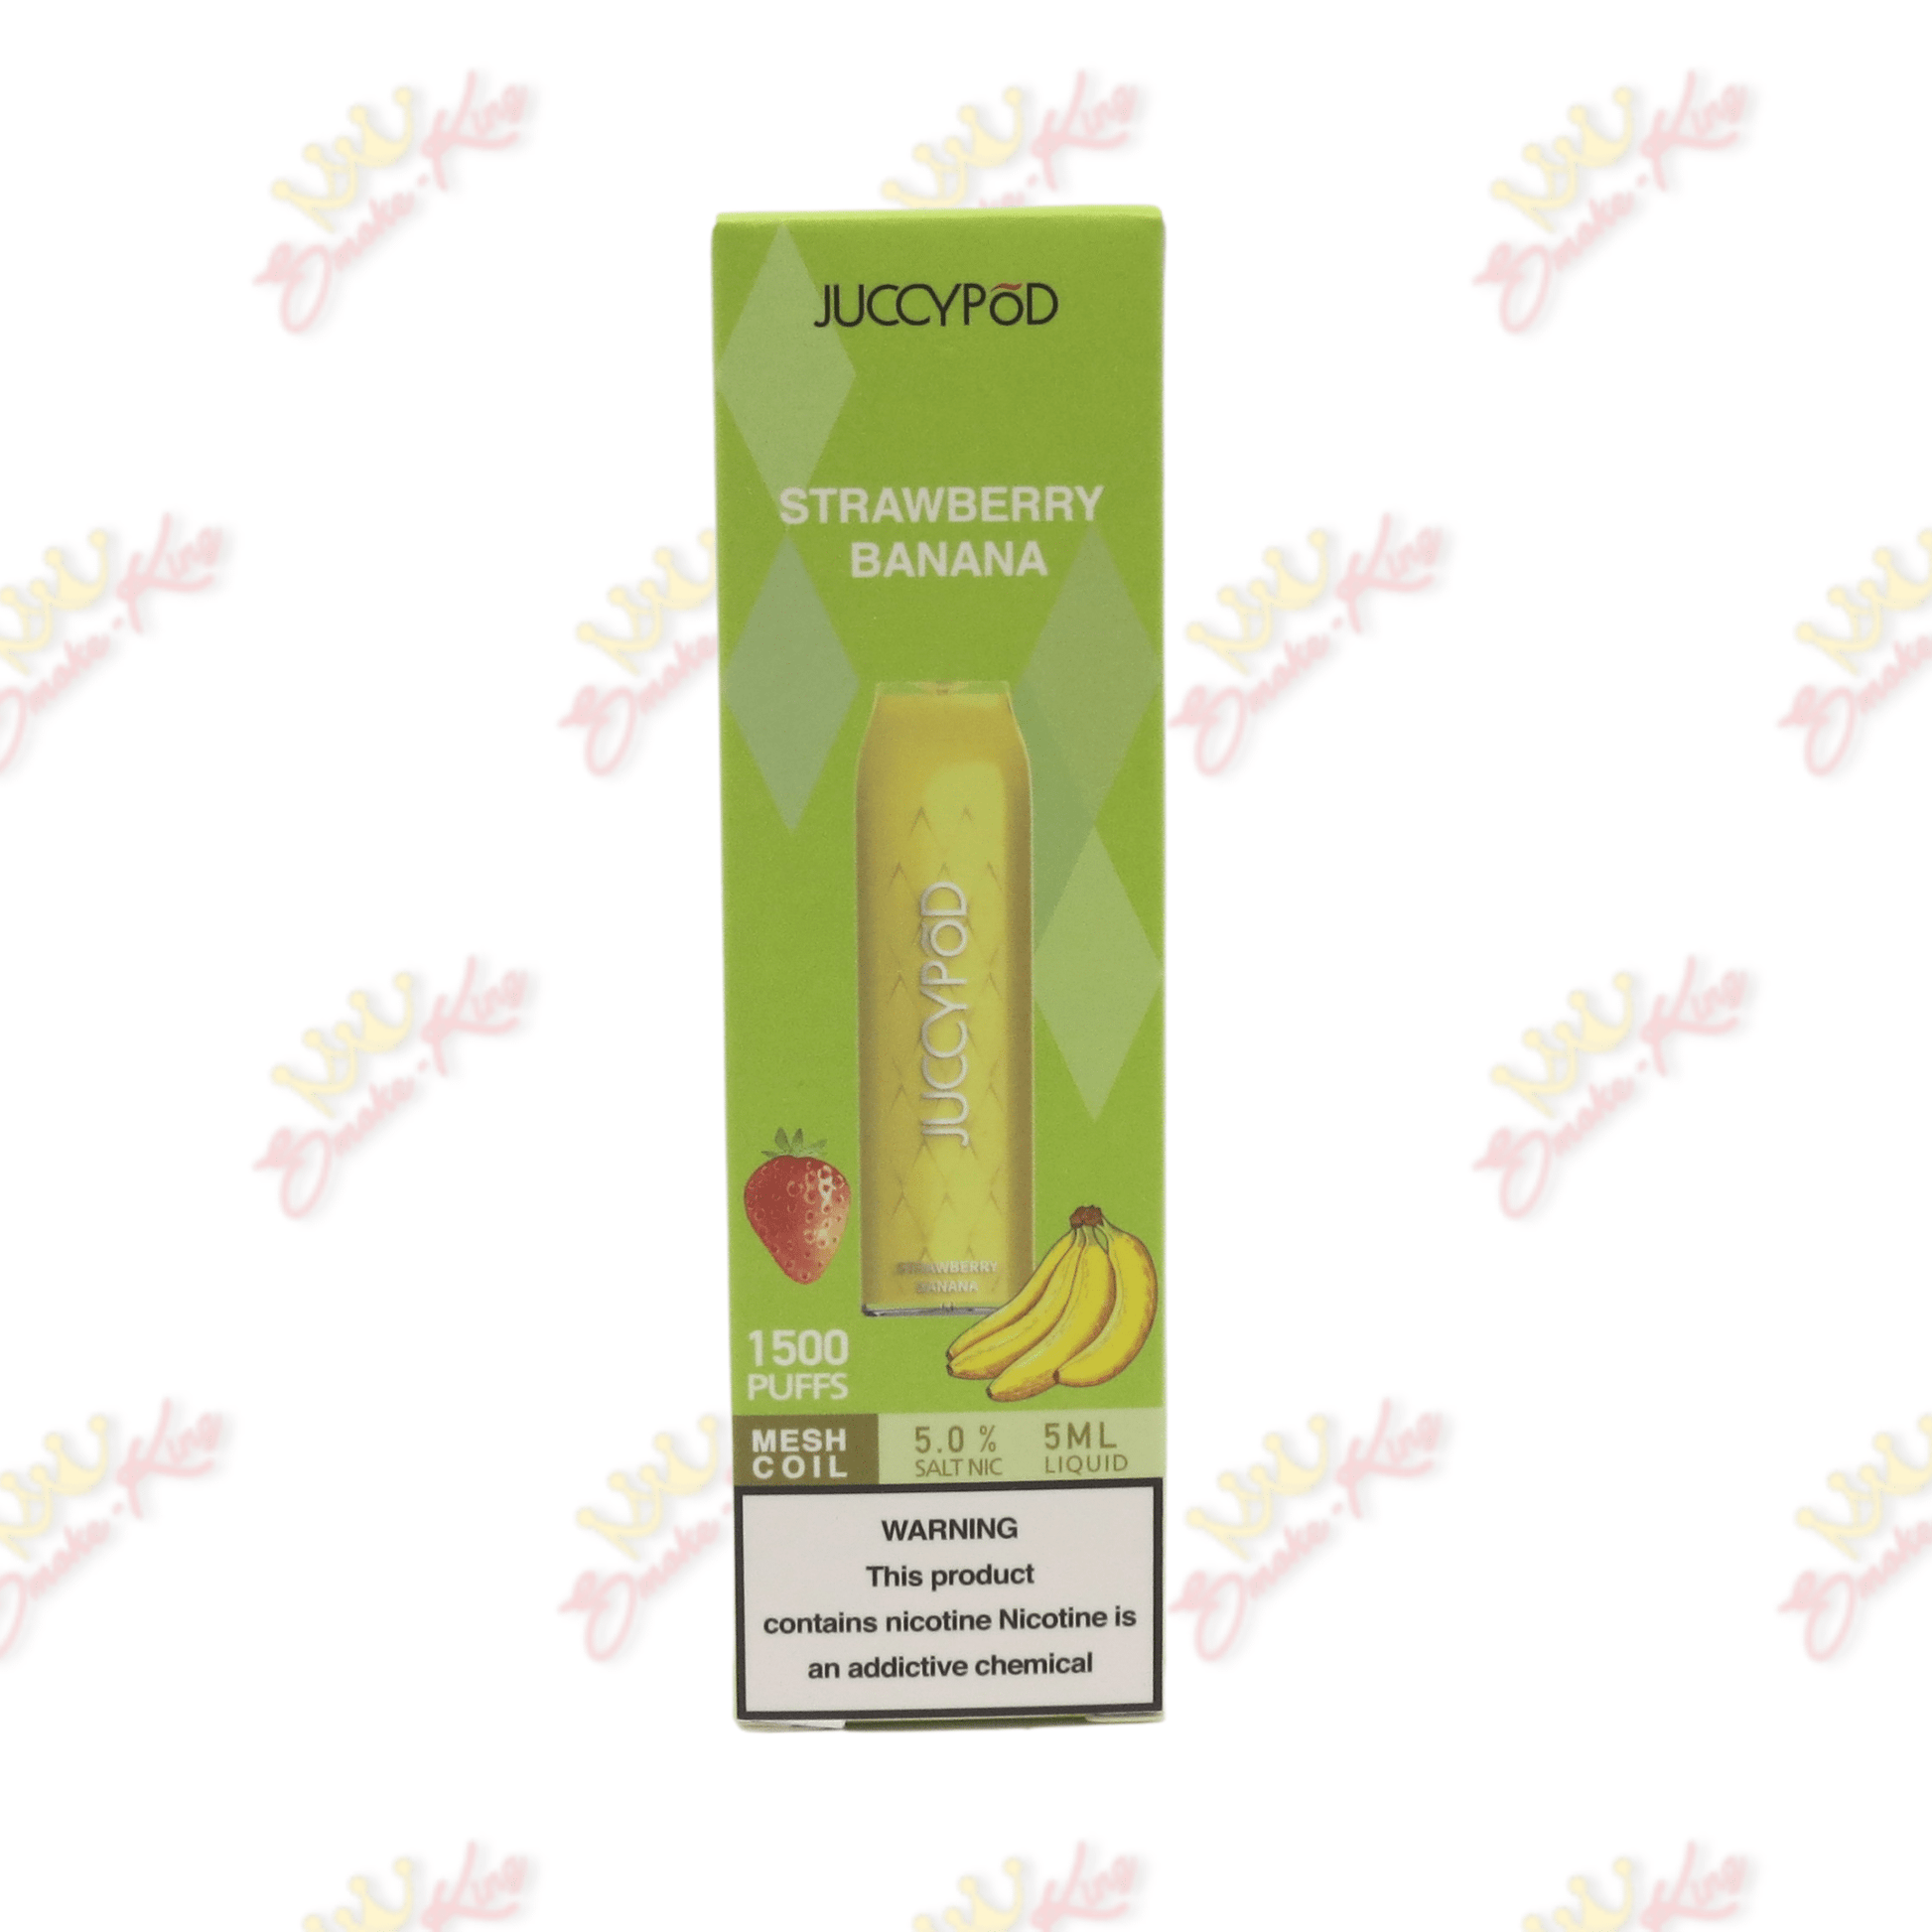 Juicy Pods Disposable Vapes Strawberry Banana / One for $11.99 Juicy Pod (1500 puffs)